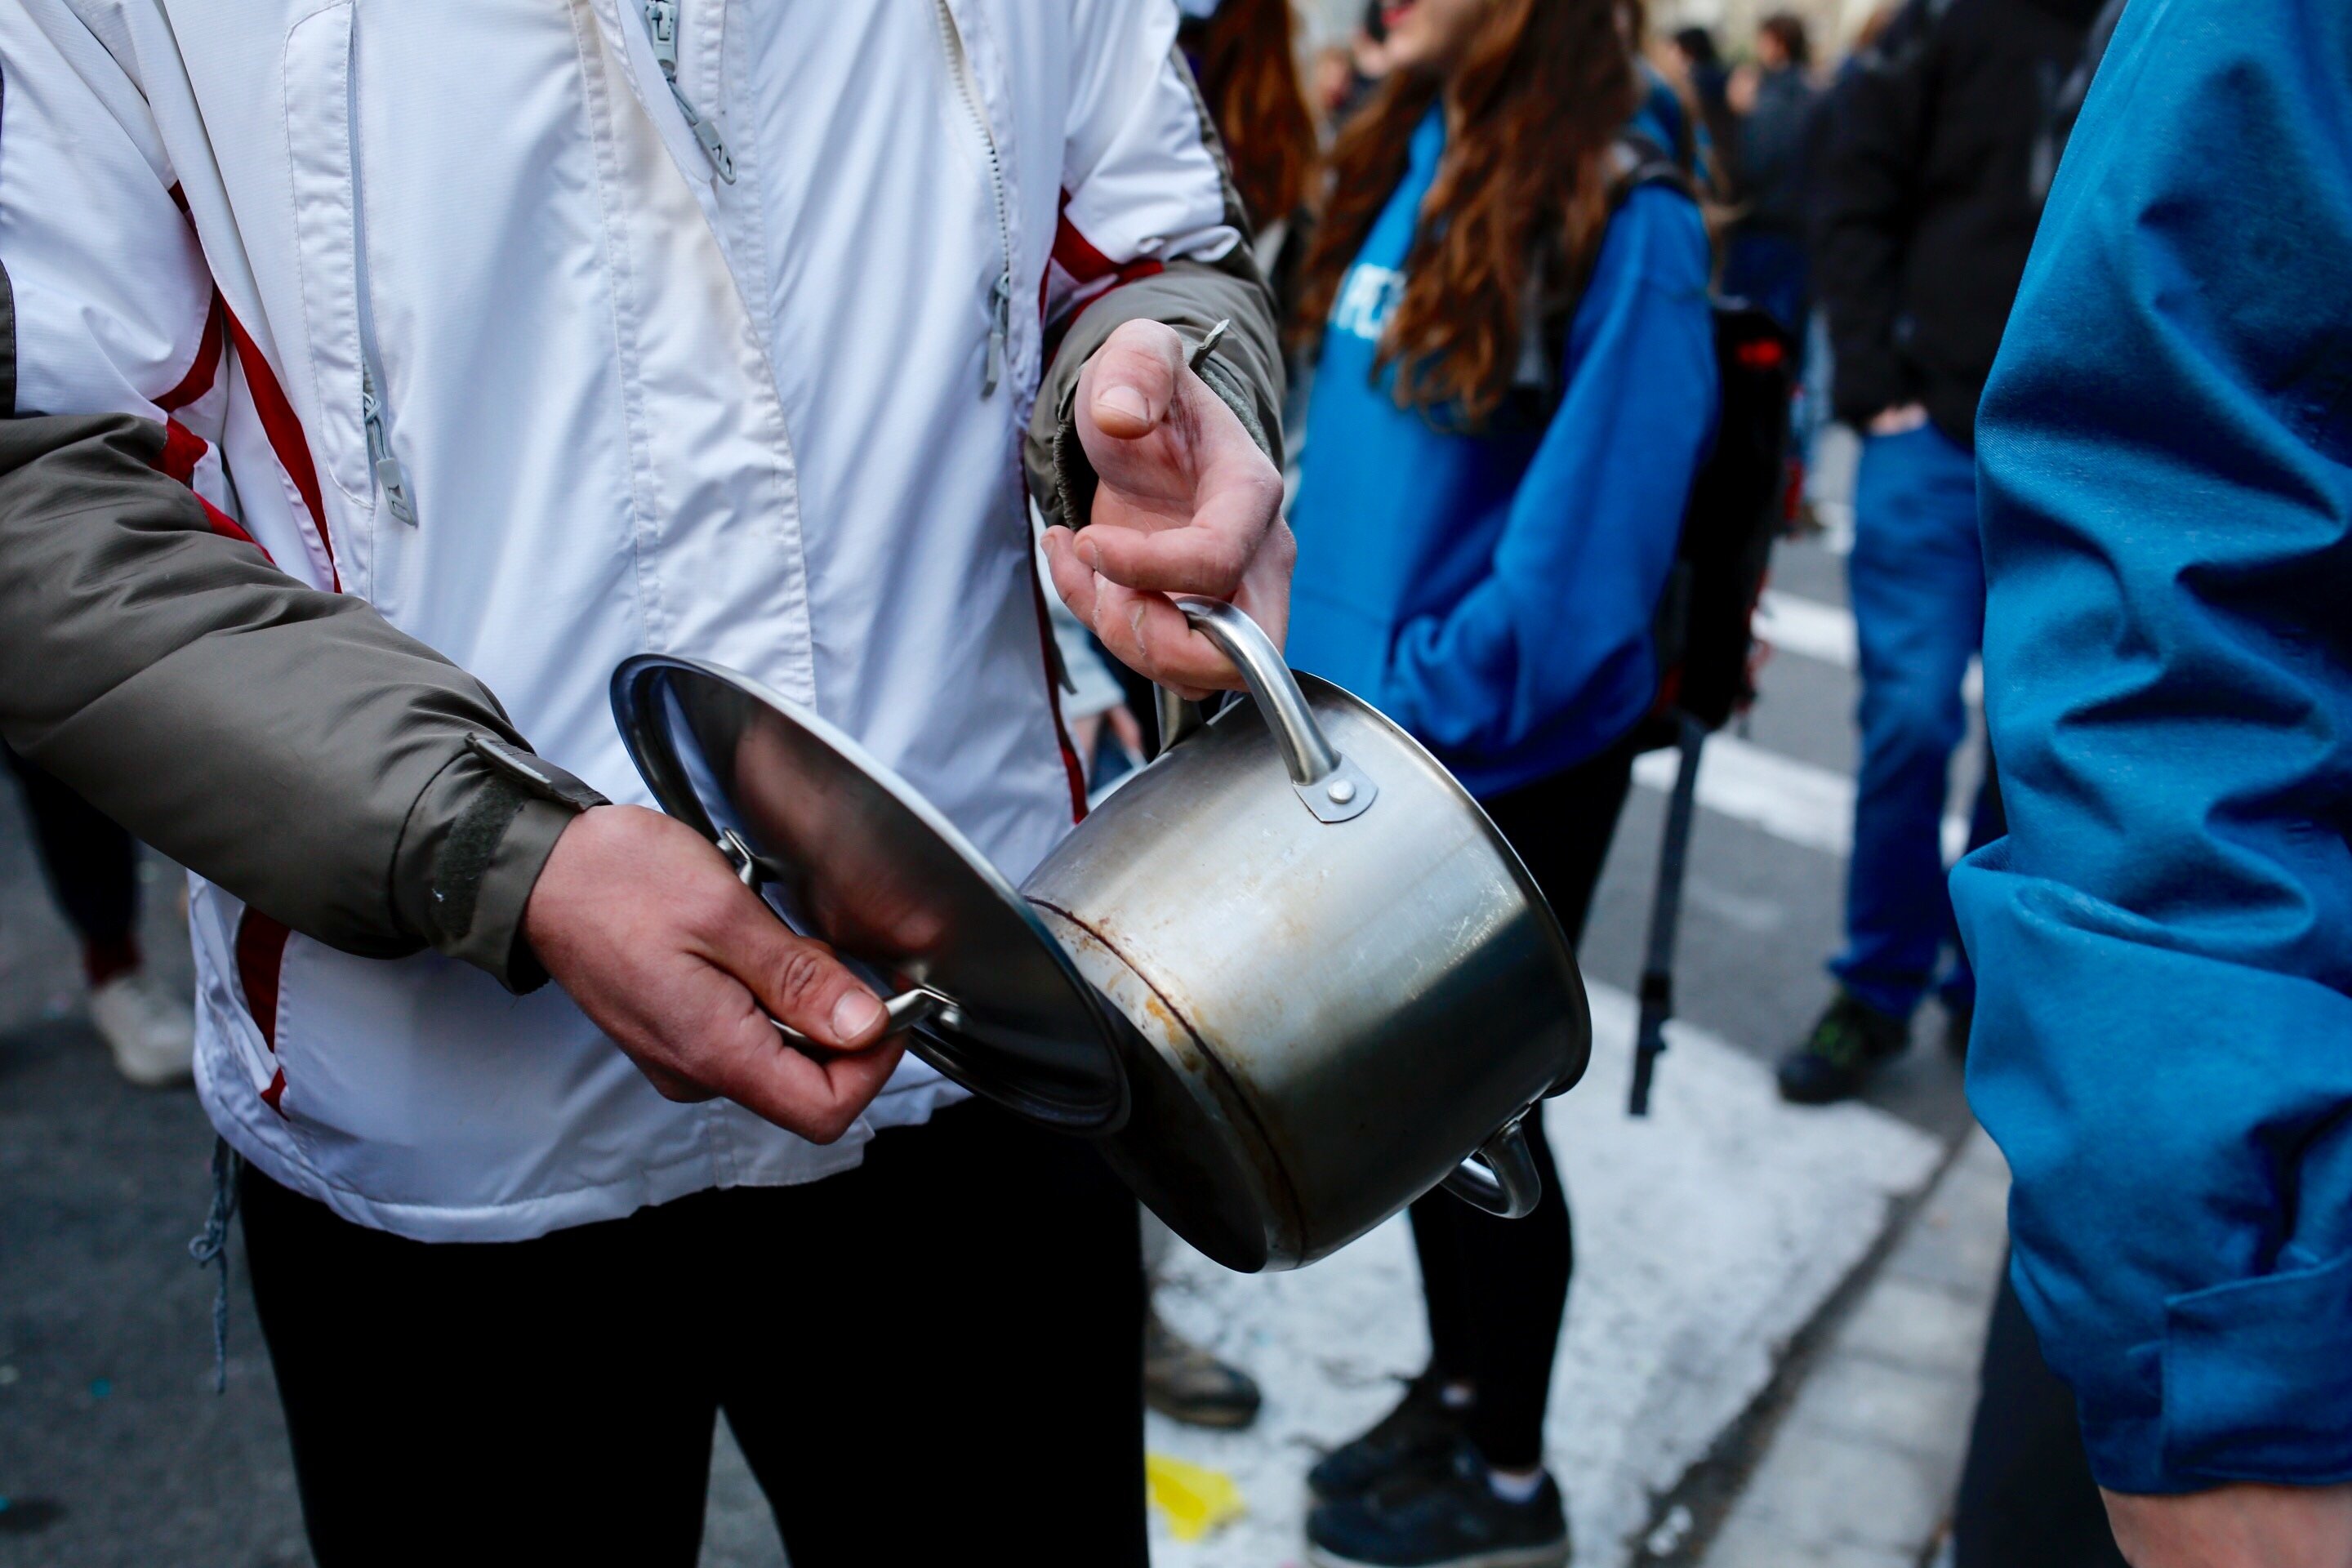 Barcelona bangs its pots and pans in protest at Felipe VI's presence